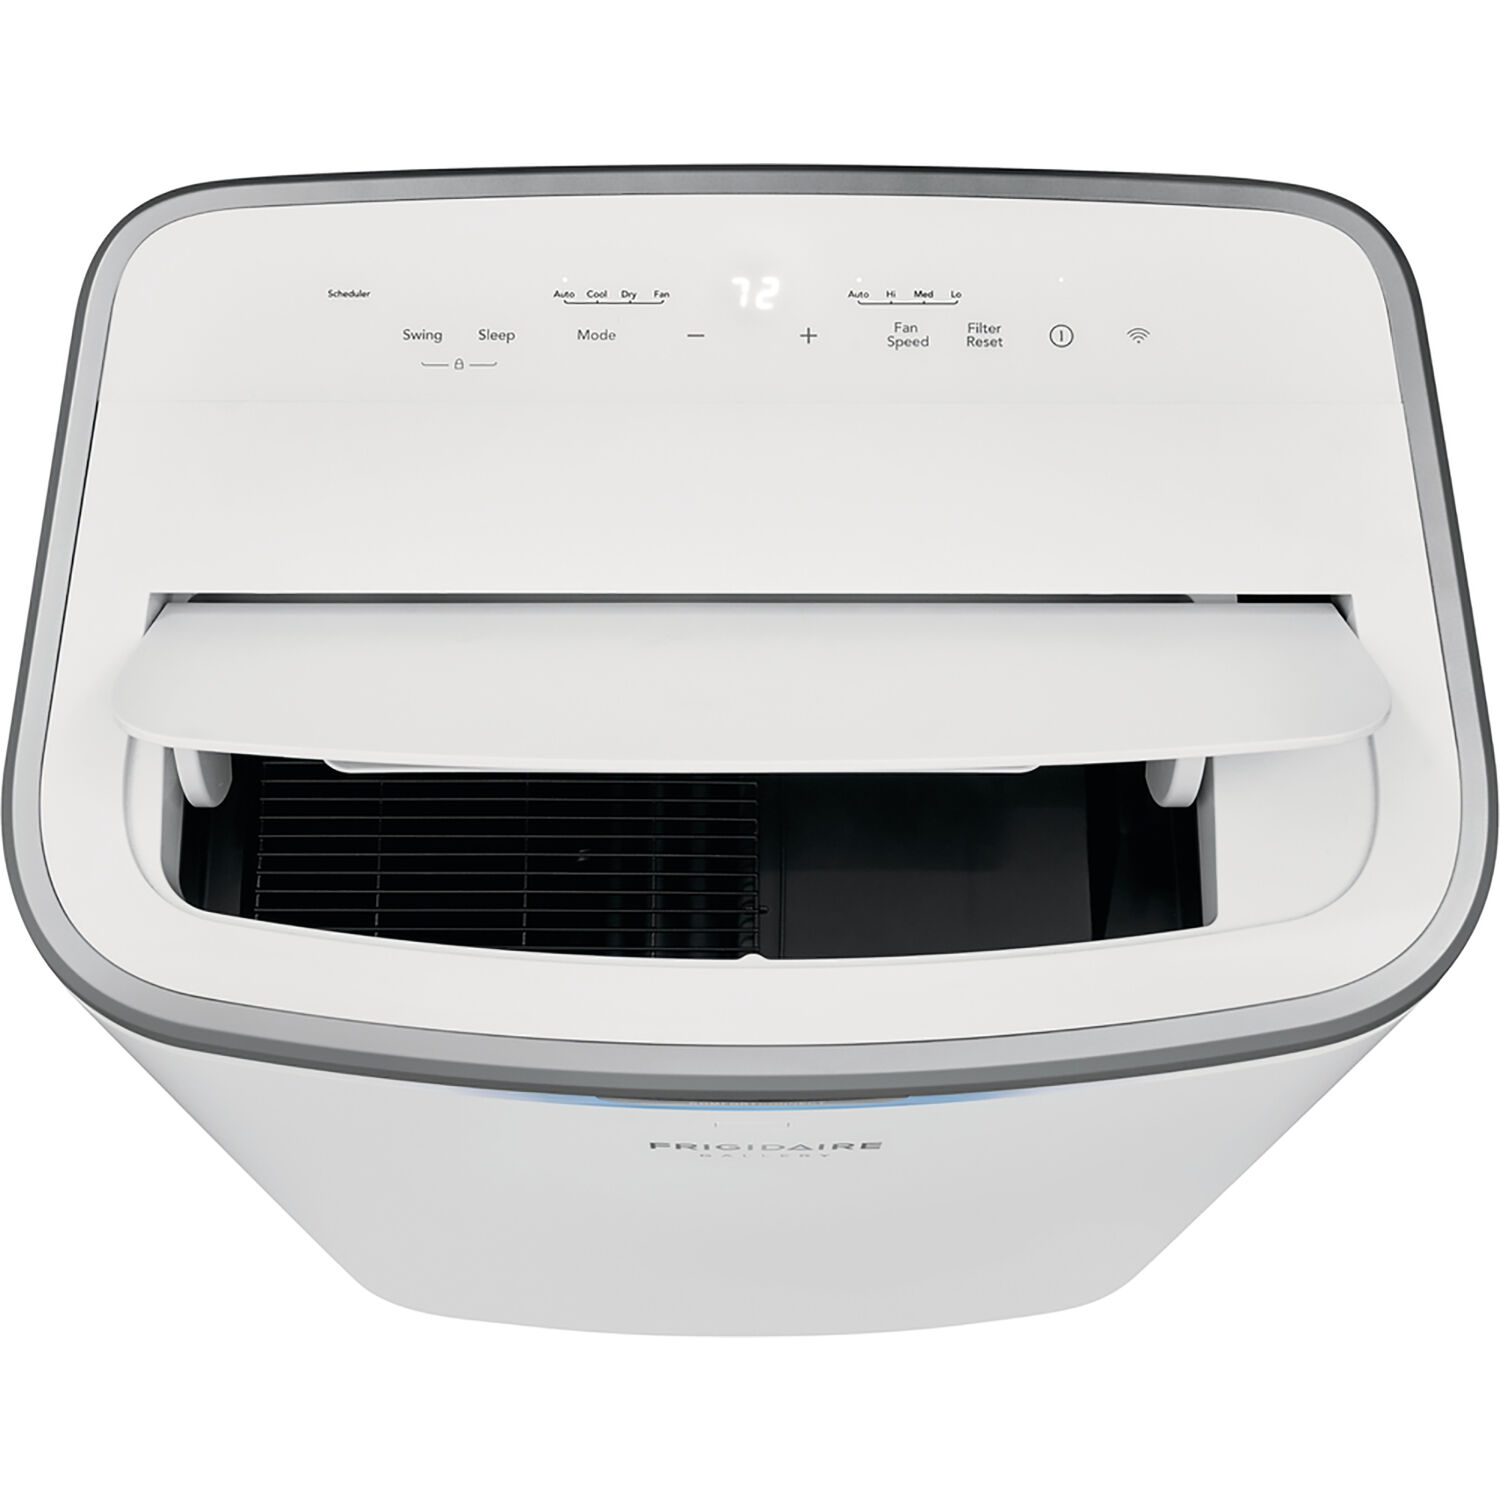 Frigidaire Cool Connect Smart Portable Air Conditioner with Wi-Fi Control for a Room up to 600-Sq. Ft. - image 12 of 14